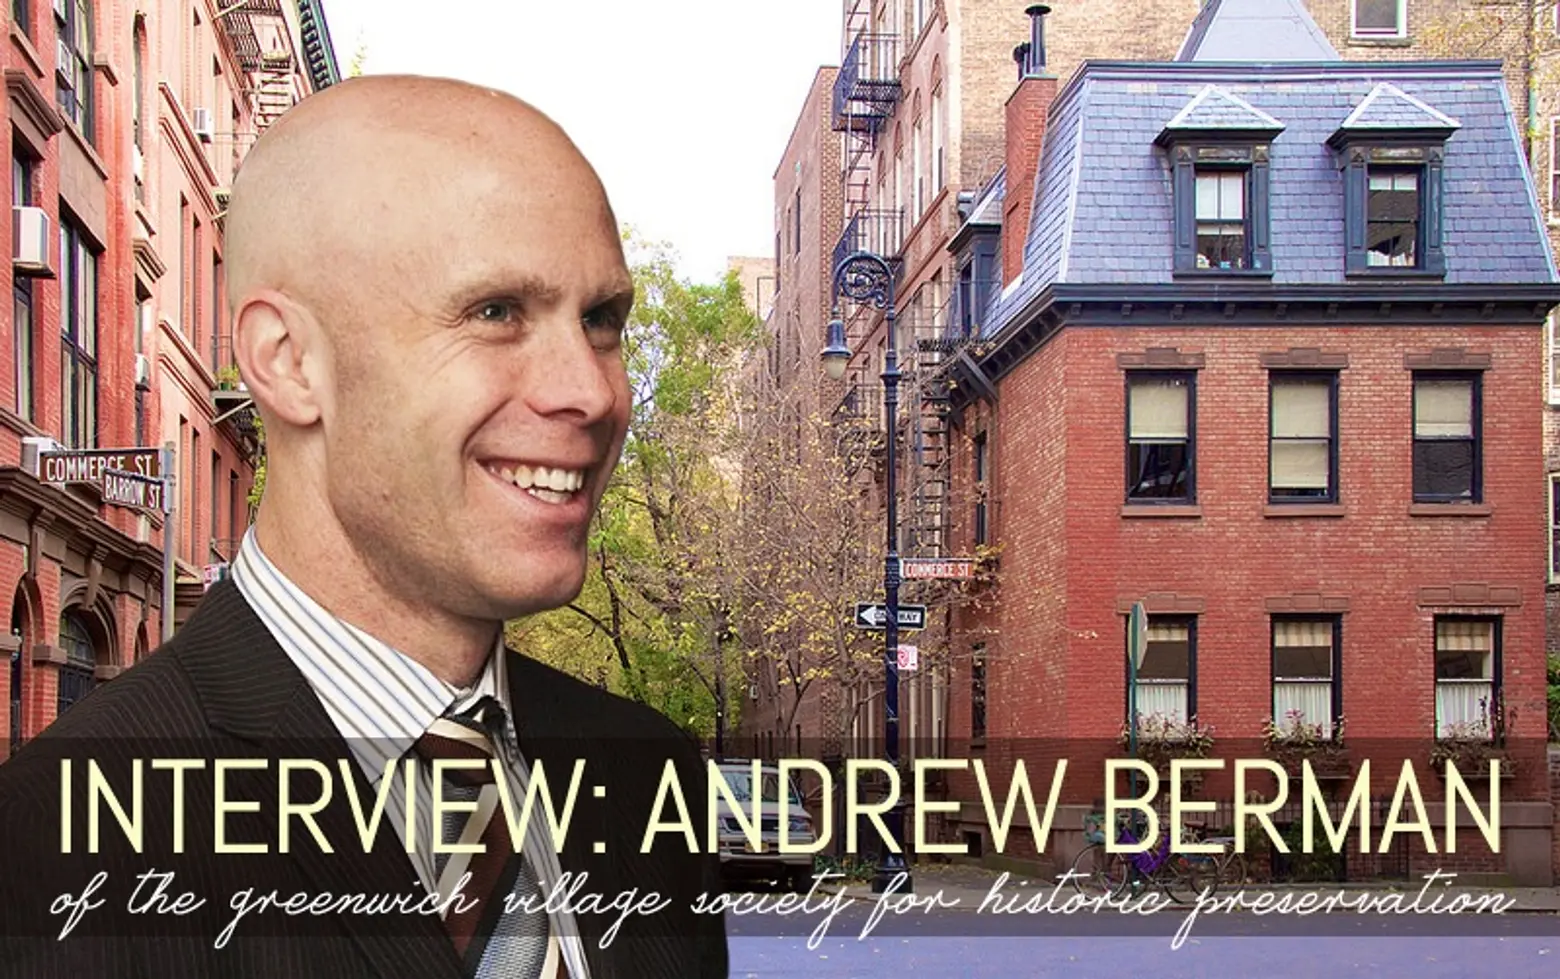 INTERVIEW: Andrew Berman, Executive Director of the Greenwich Village Society for Historic Preservation